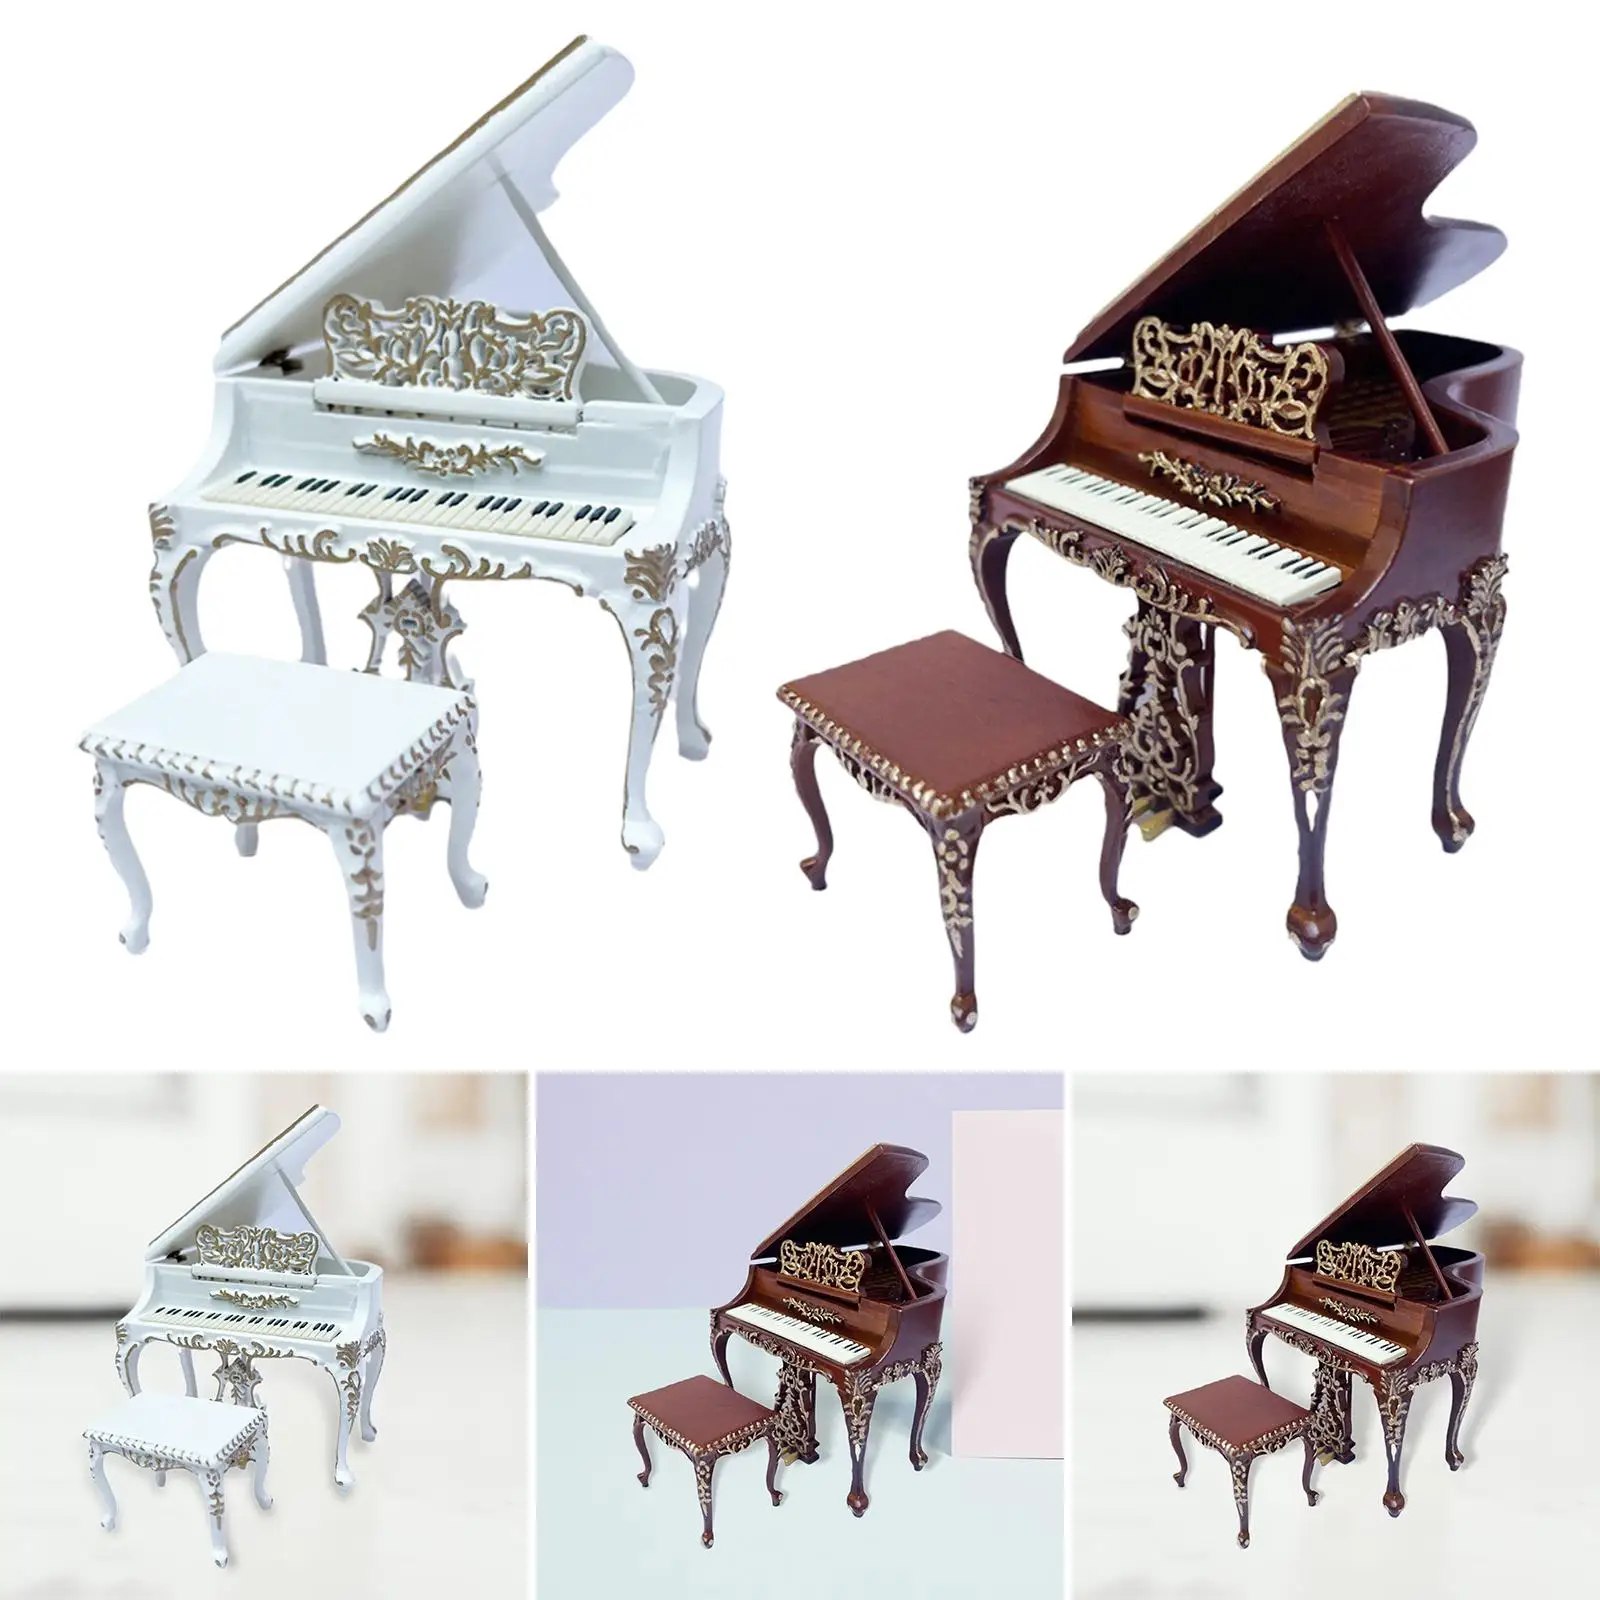 Miniature Piano Model with Stool Dollhouse Decor Mini House Scene Furniture Miniature Piano with Chair for Living Room Decor